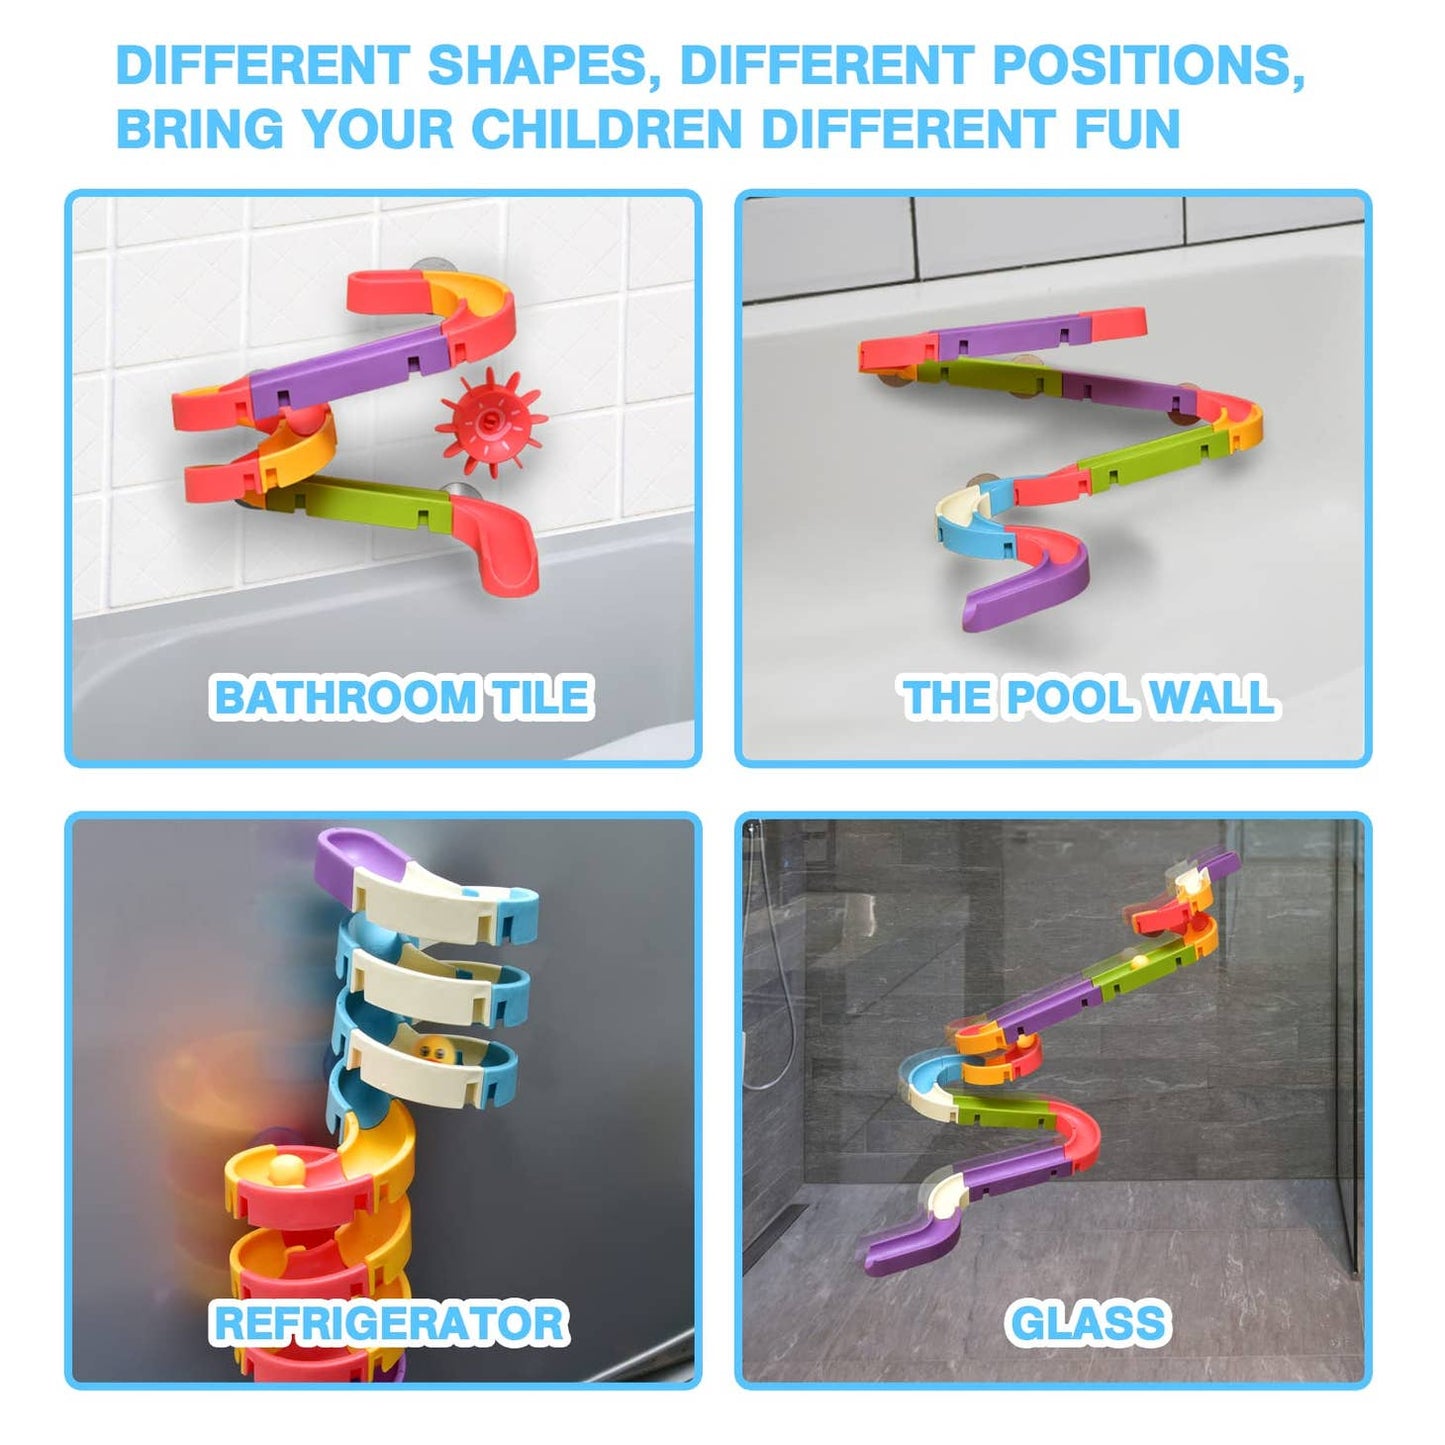 49 Piece Buildable Water Slide Bath Toy